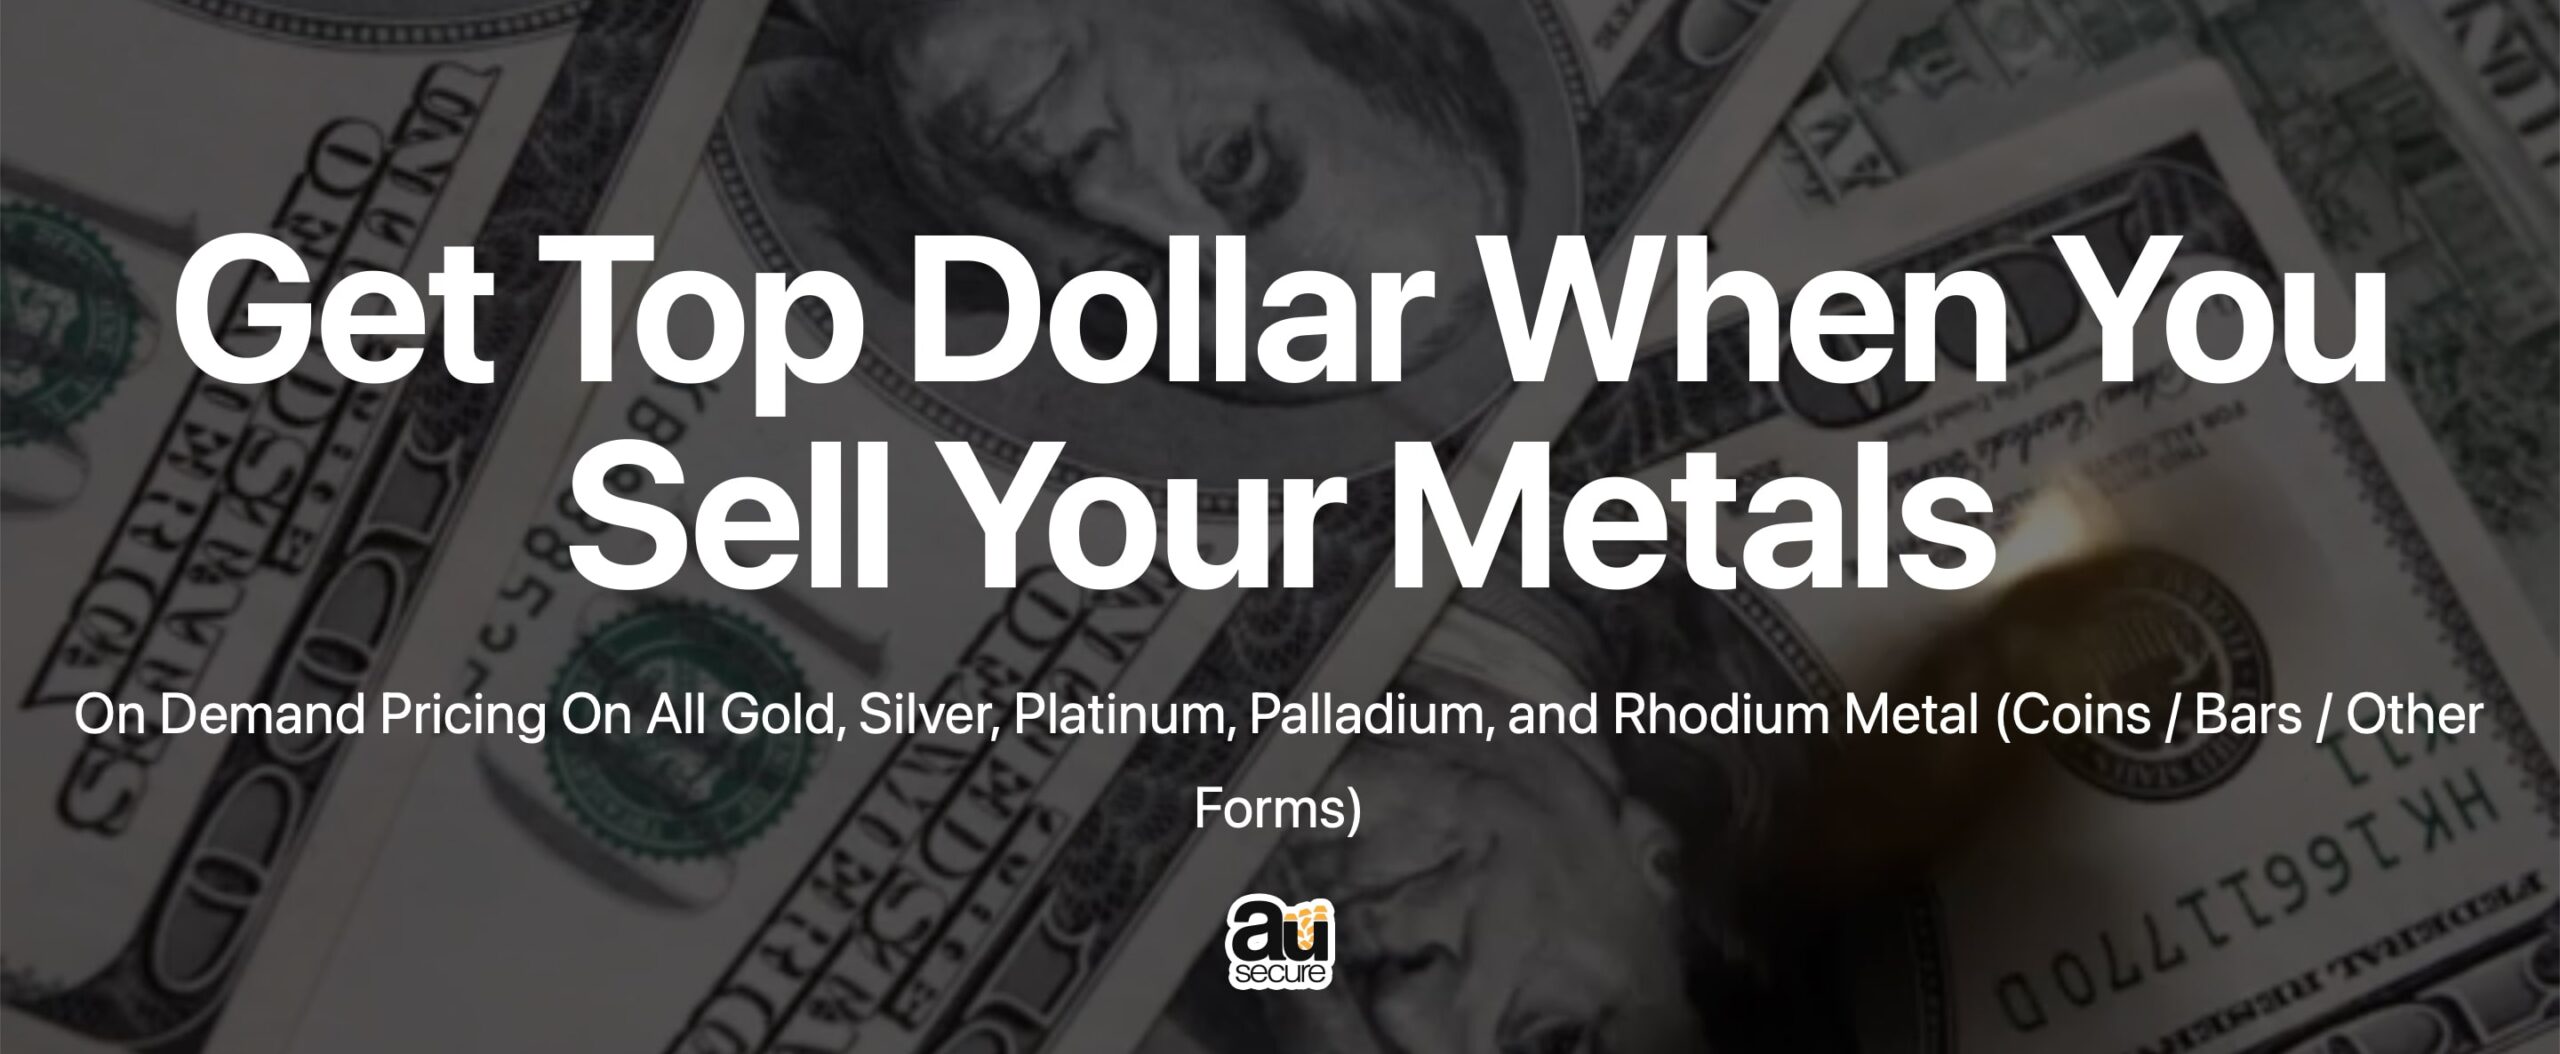 Get Top Dollar When You Sell Your Metals!!! Gold, Silver, Platinum, Palladium, and Rhodium